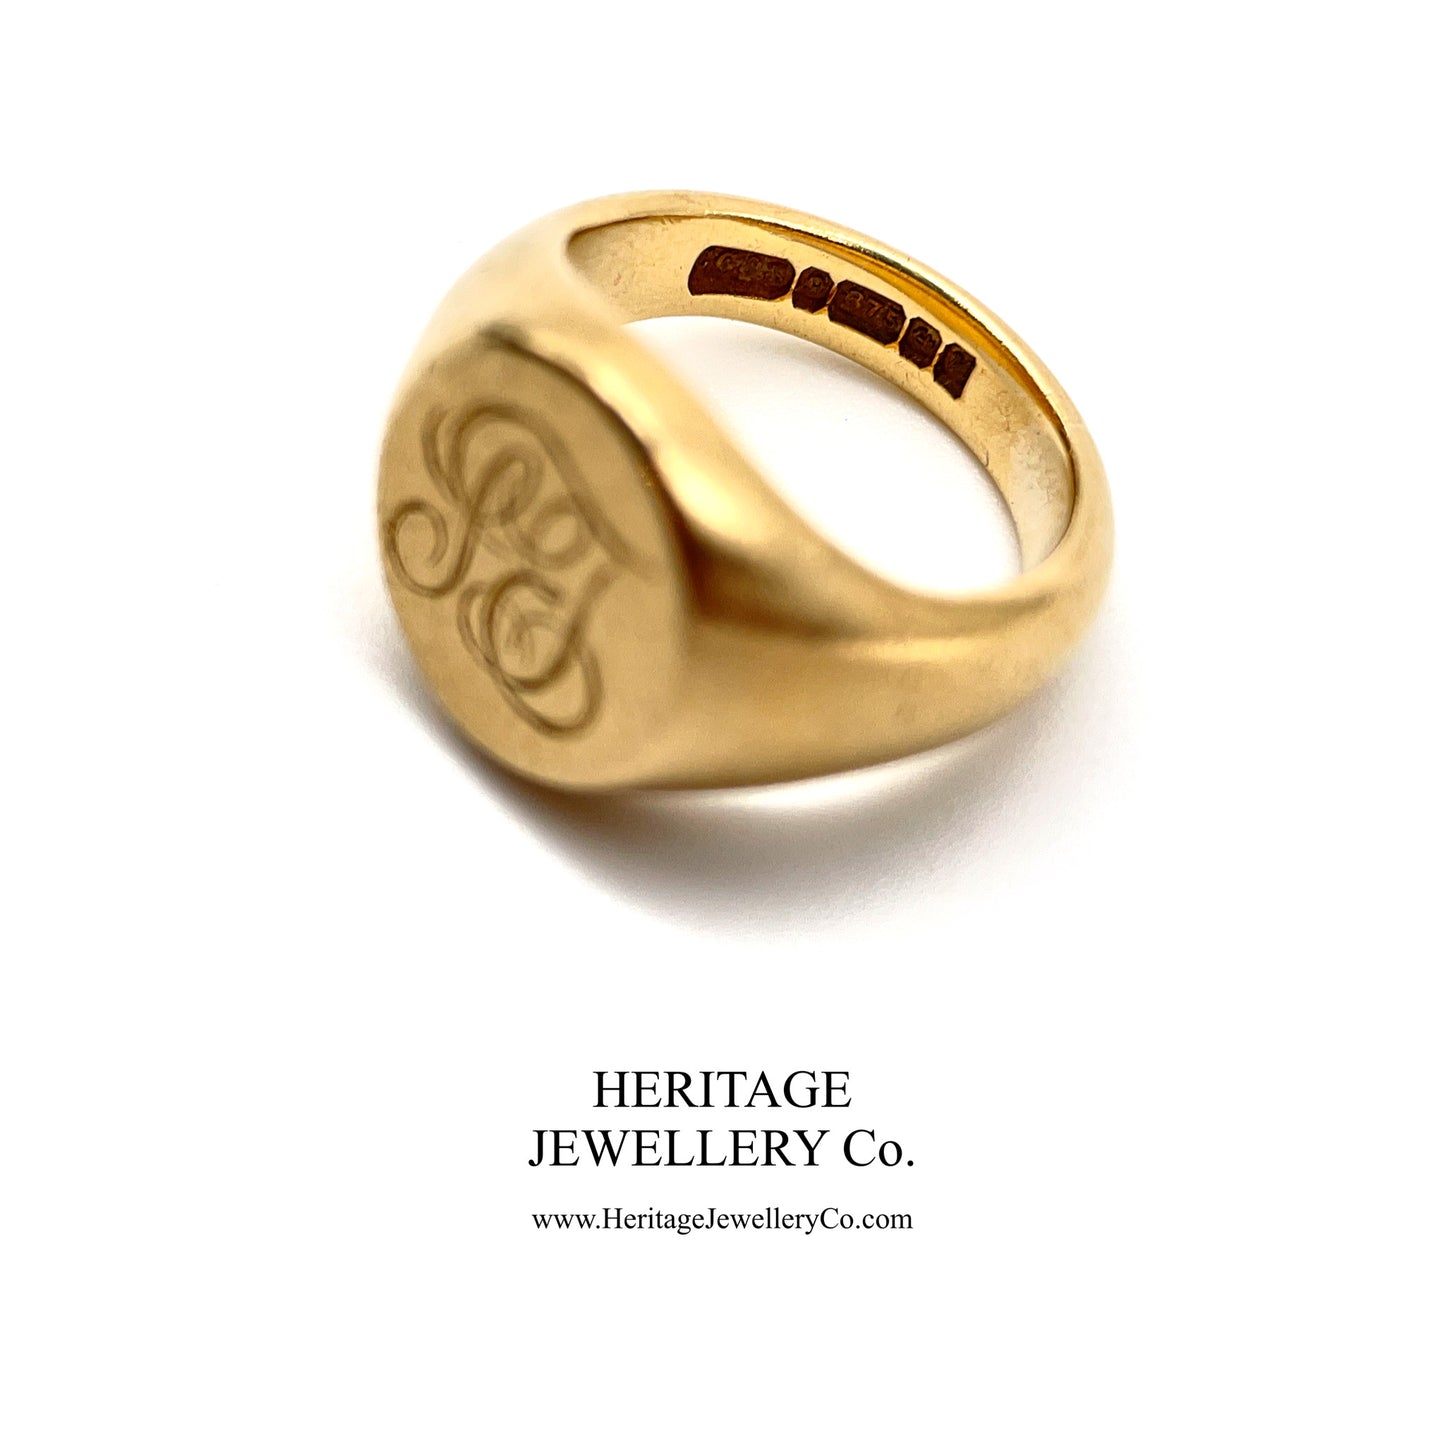 Heavy Vintage Gold Signet Ring (9ct Gold)